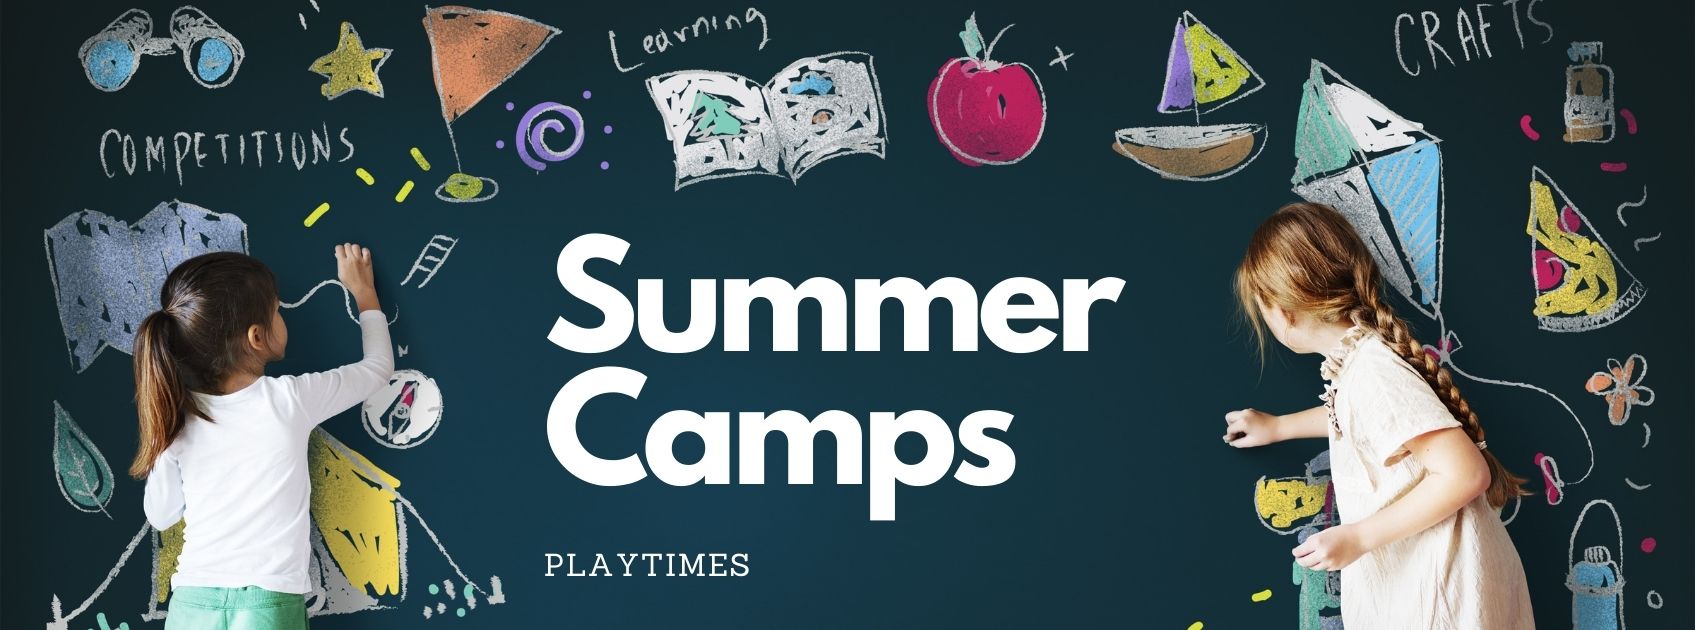 Epic Summer Camps for Kids and Teens